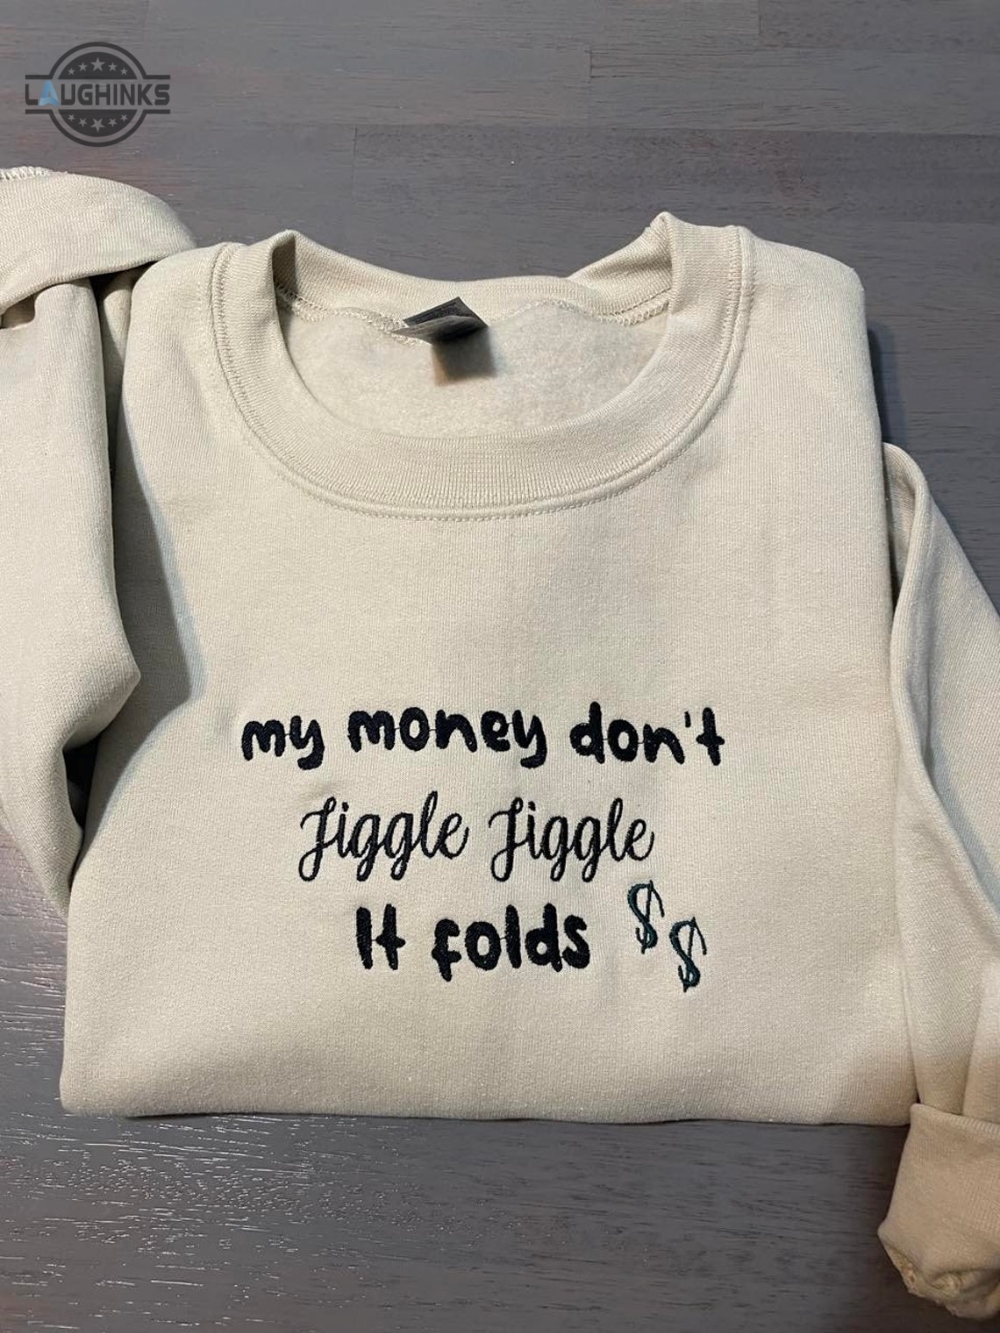 My Money Dont Jiggle Jiggle Embroidered Crewneck Dont Jiggle Jiggle Embroidered Sweatshirt Custom Embroidered Sweatshirts Embroidery Tshirt Sweatshirt Hoodie Gift